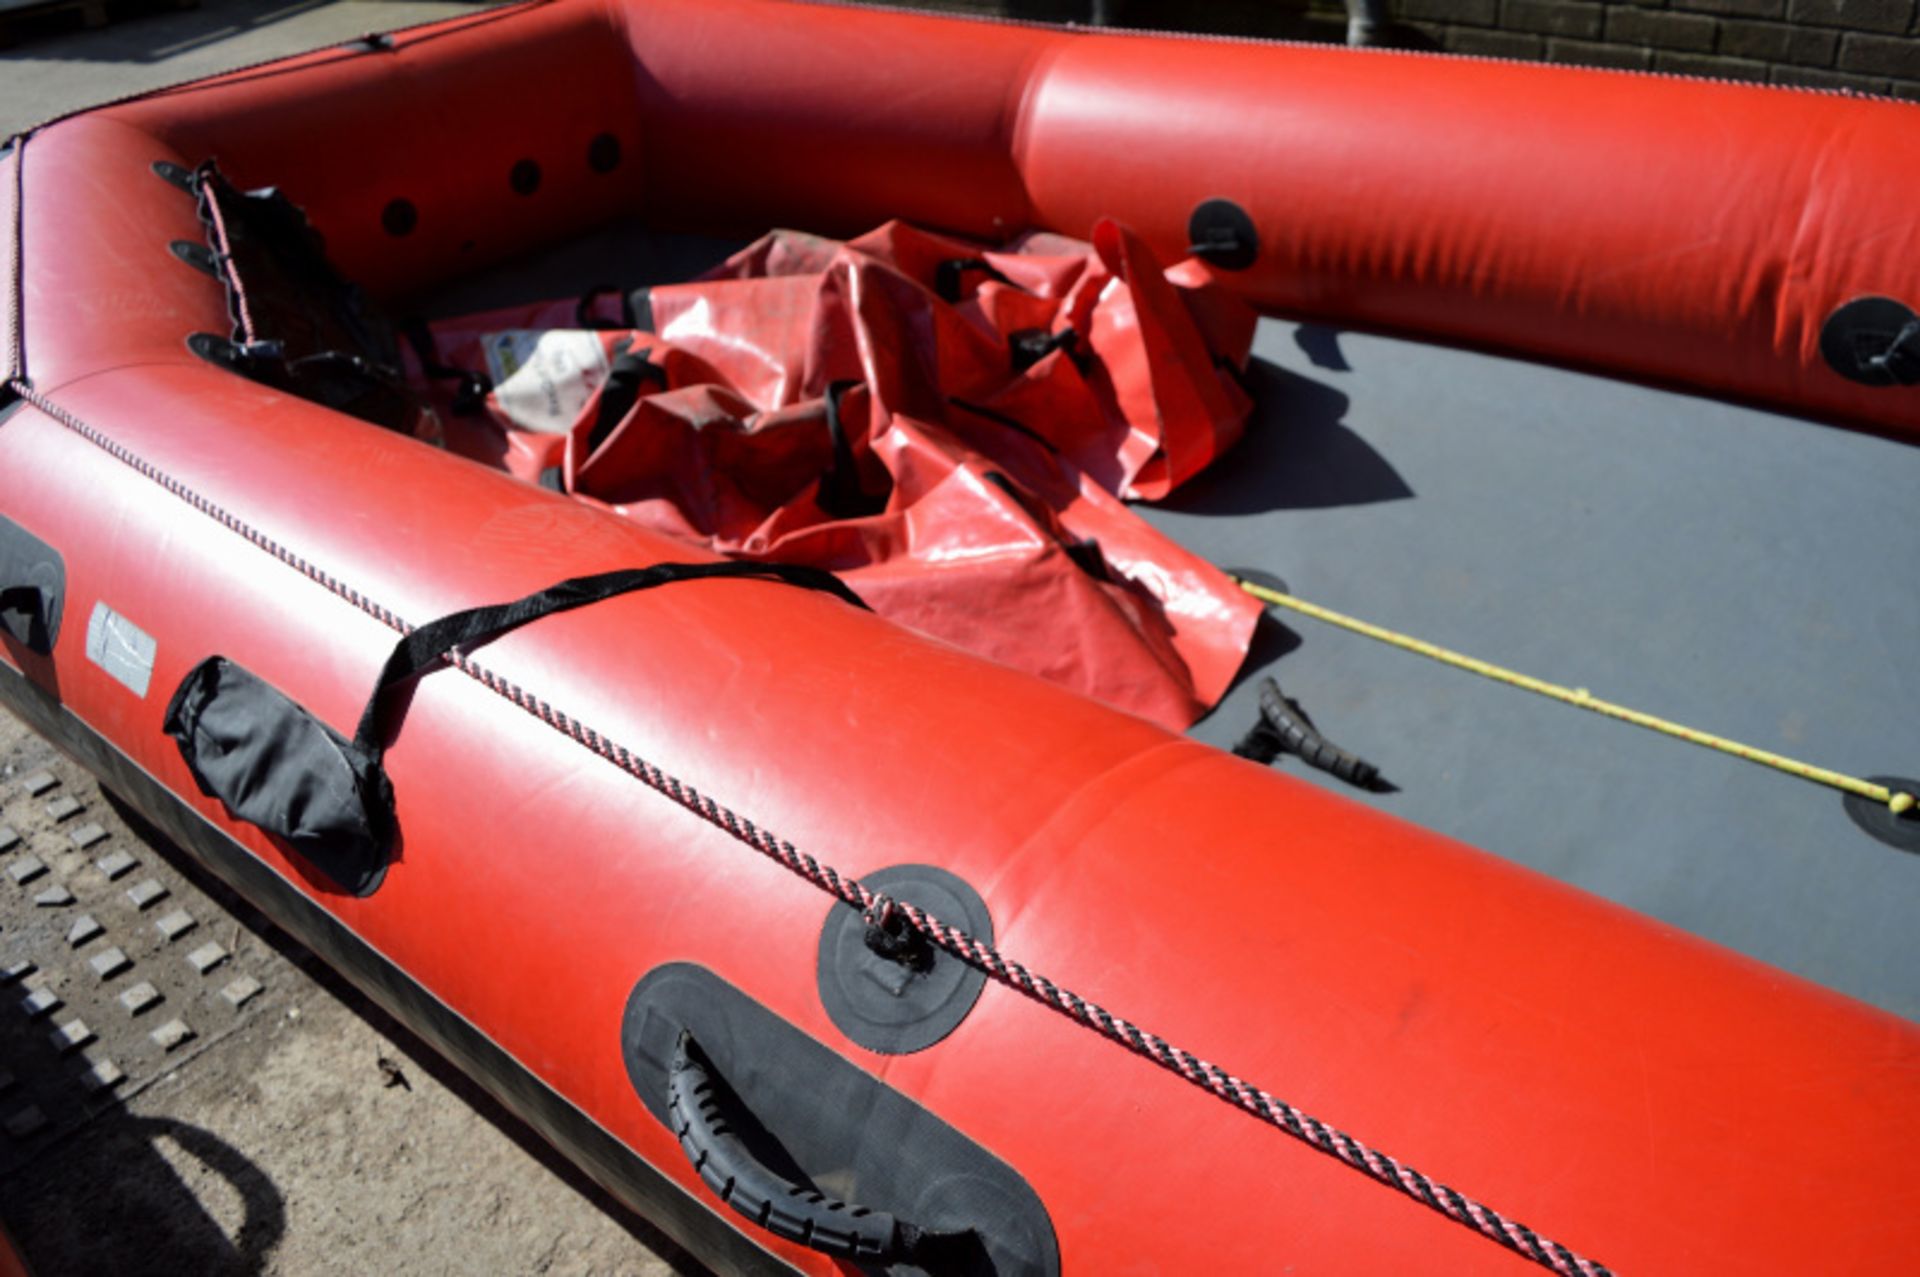 SIT Safequip ReqQraft Flood 15 inflatable boat - Image 9 of 11